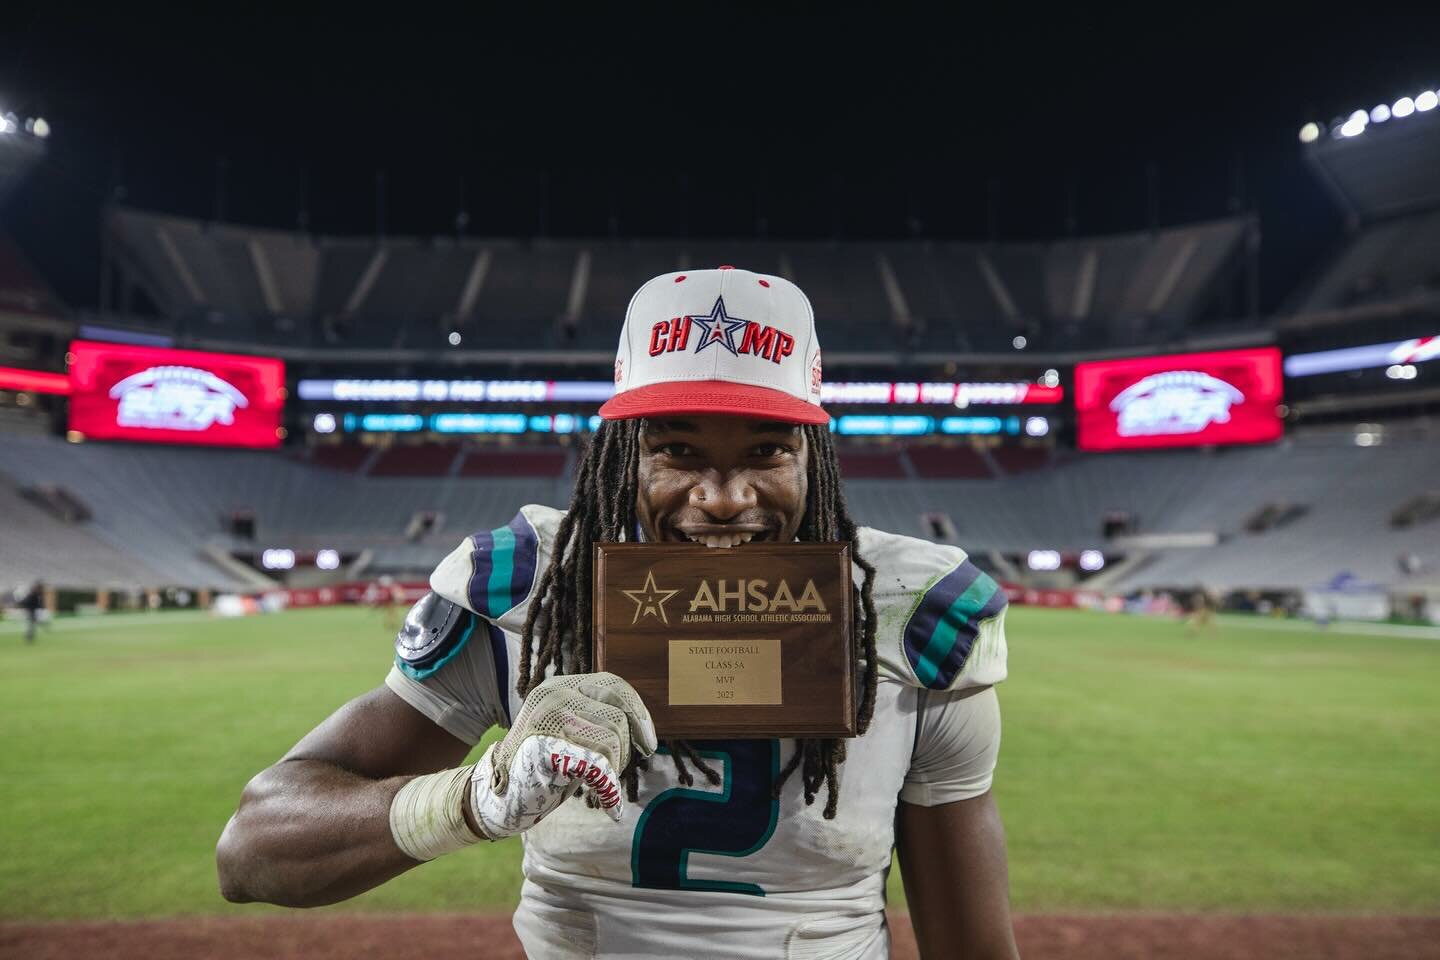 Senior and NC State commit Ronnie Royal celebrates with his MVP plaque after 245 all-purpose yards with two rushing touchdowns, four tackles and a one-handed interception helped Gulf Shores take down Ramsay 21-14 Thursday night. Royal will represent the Dolphins later this month at the AHSAA North-South All-Star Game.